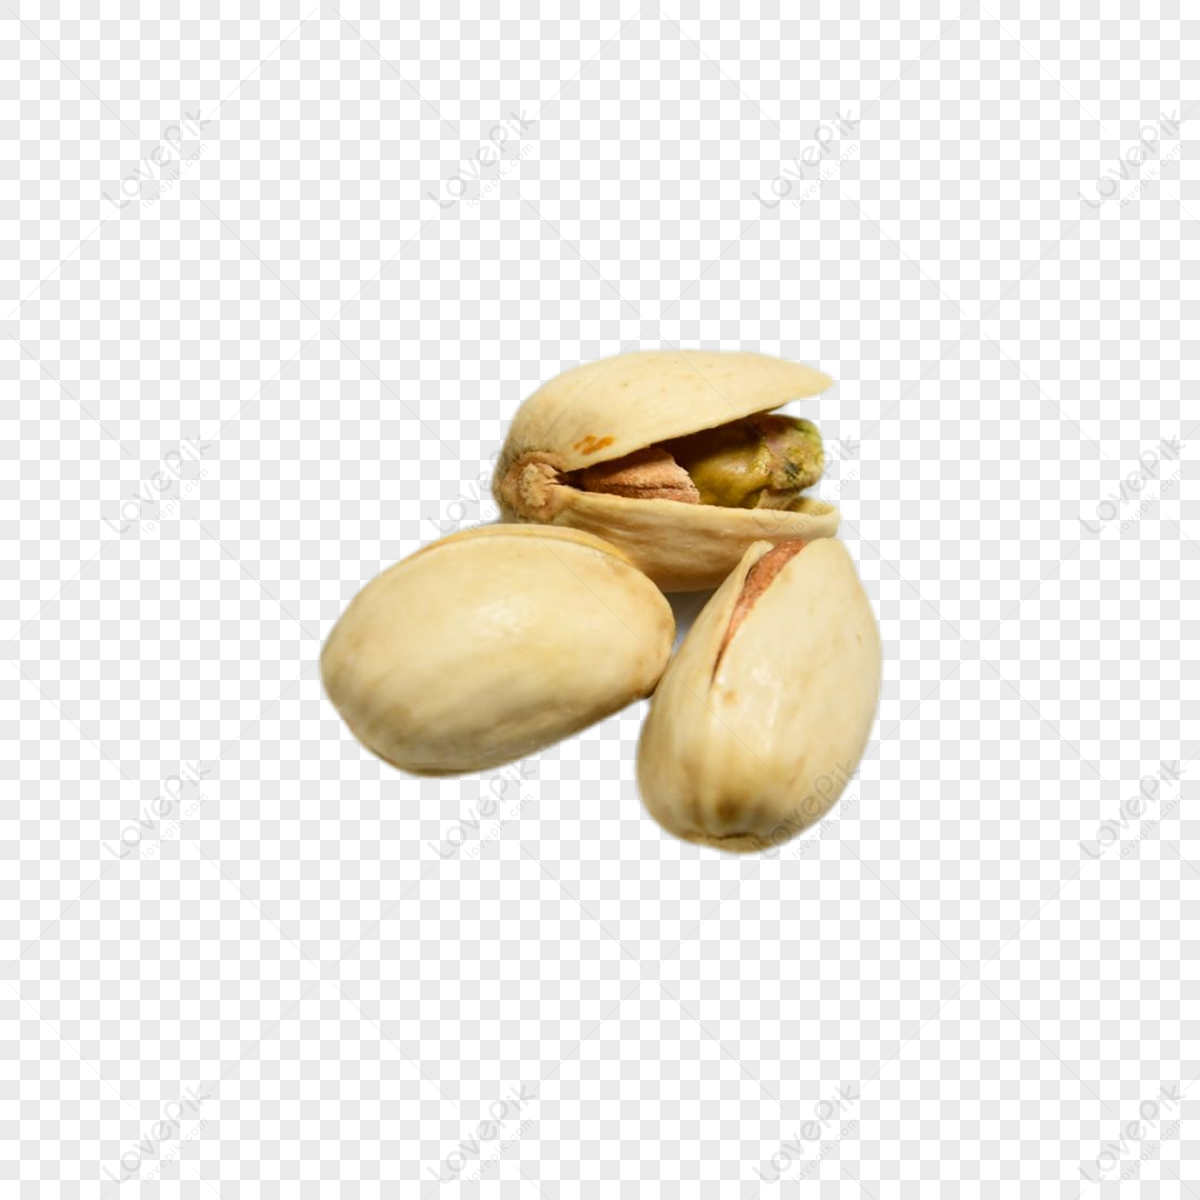 Bowl Of Pistachios On White Background Images – Browse 18,478 Stock Photos,  Vectors, and Video